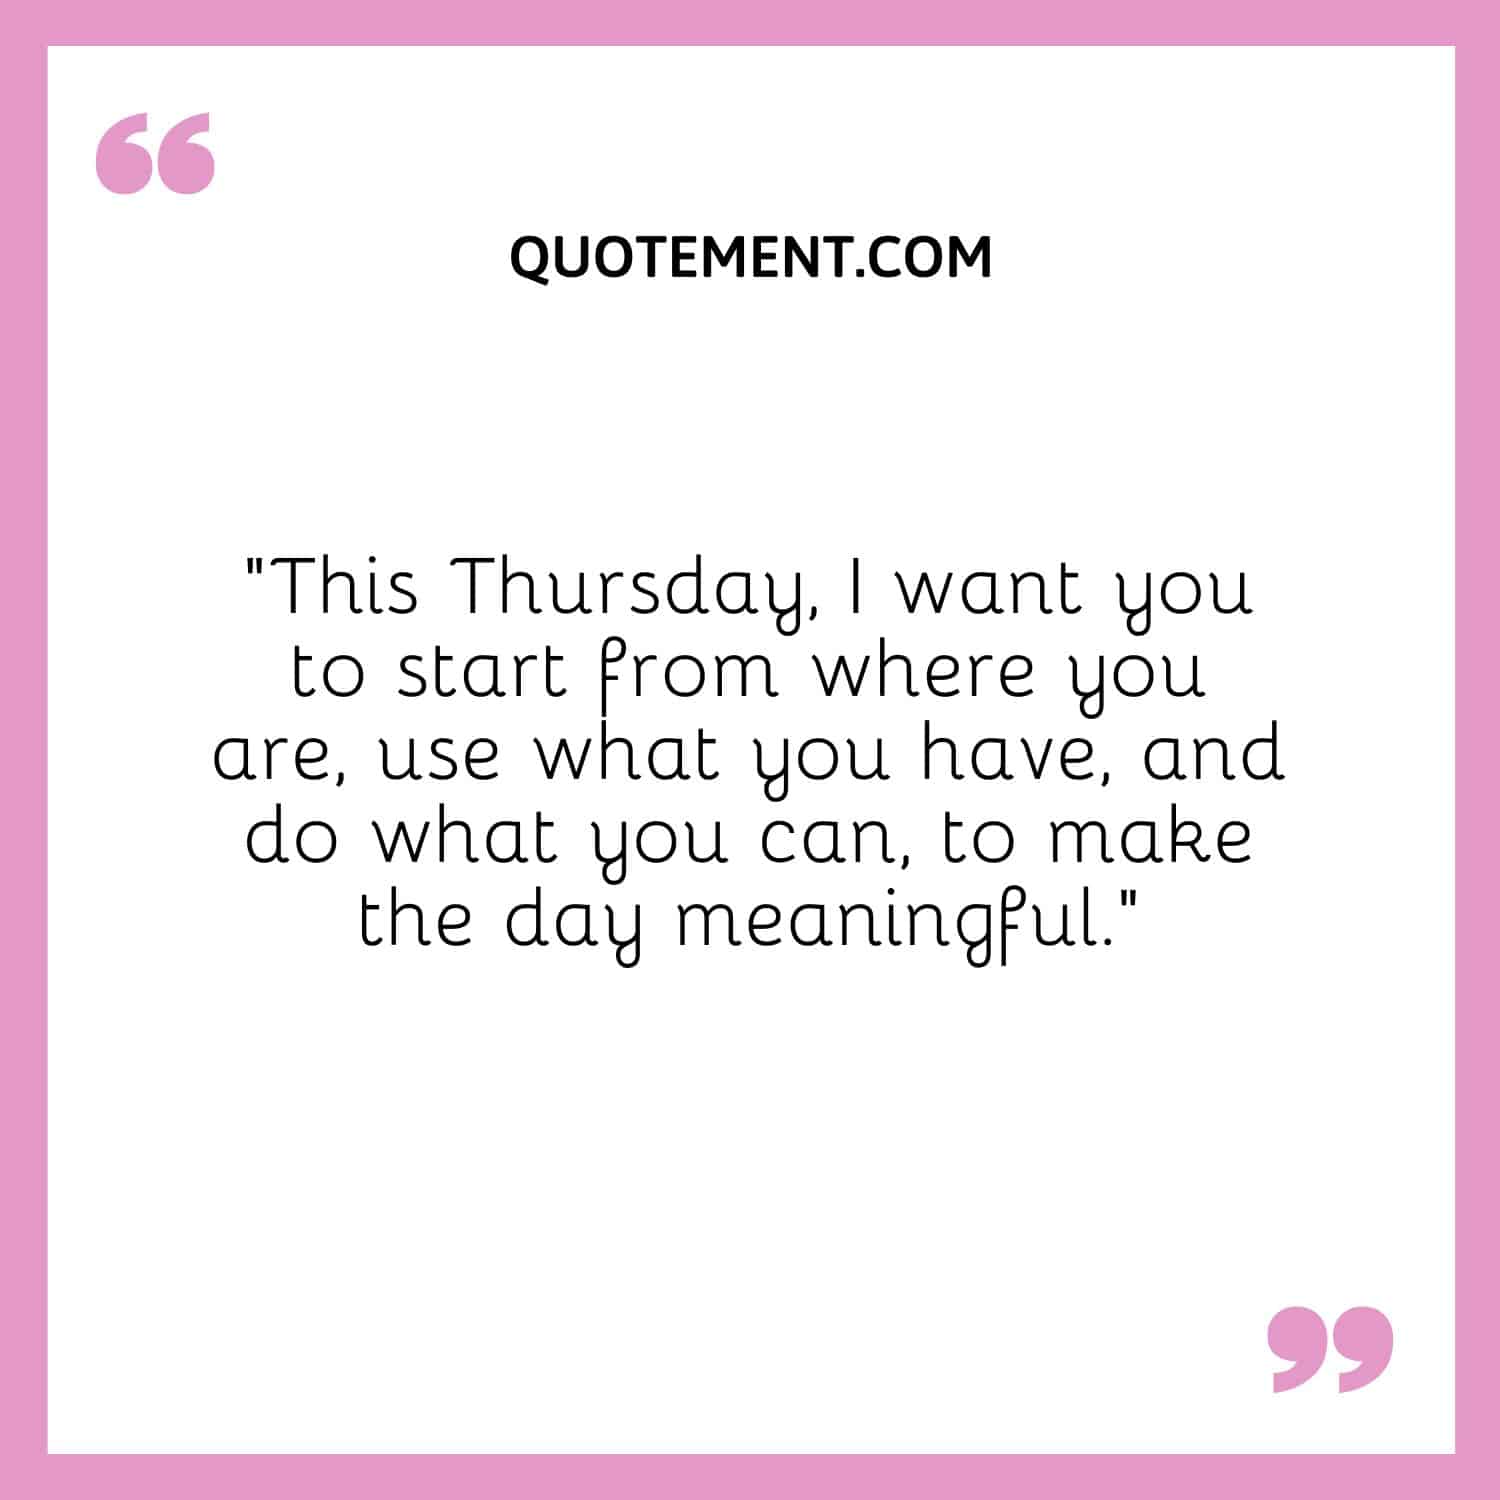 “This Thursday, I want you to start from where you are, use what you have, and do what you can, to make the day meaningful.“